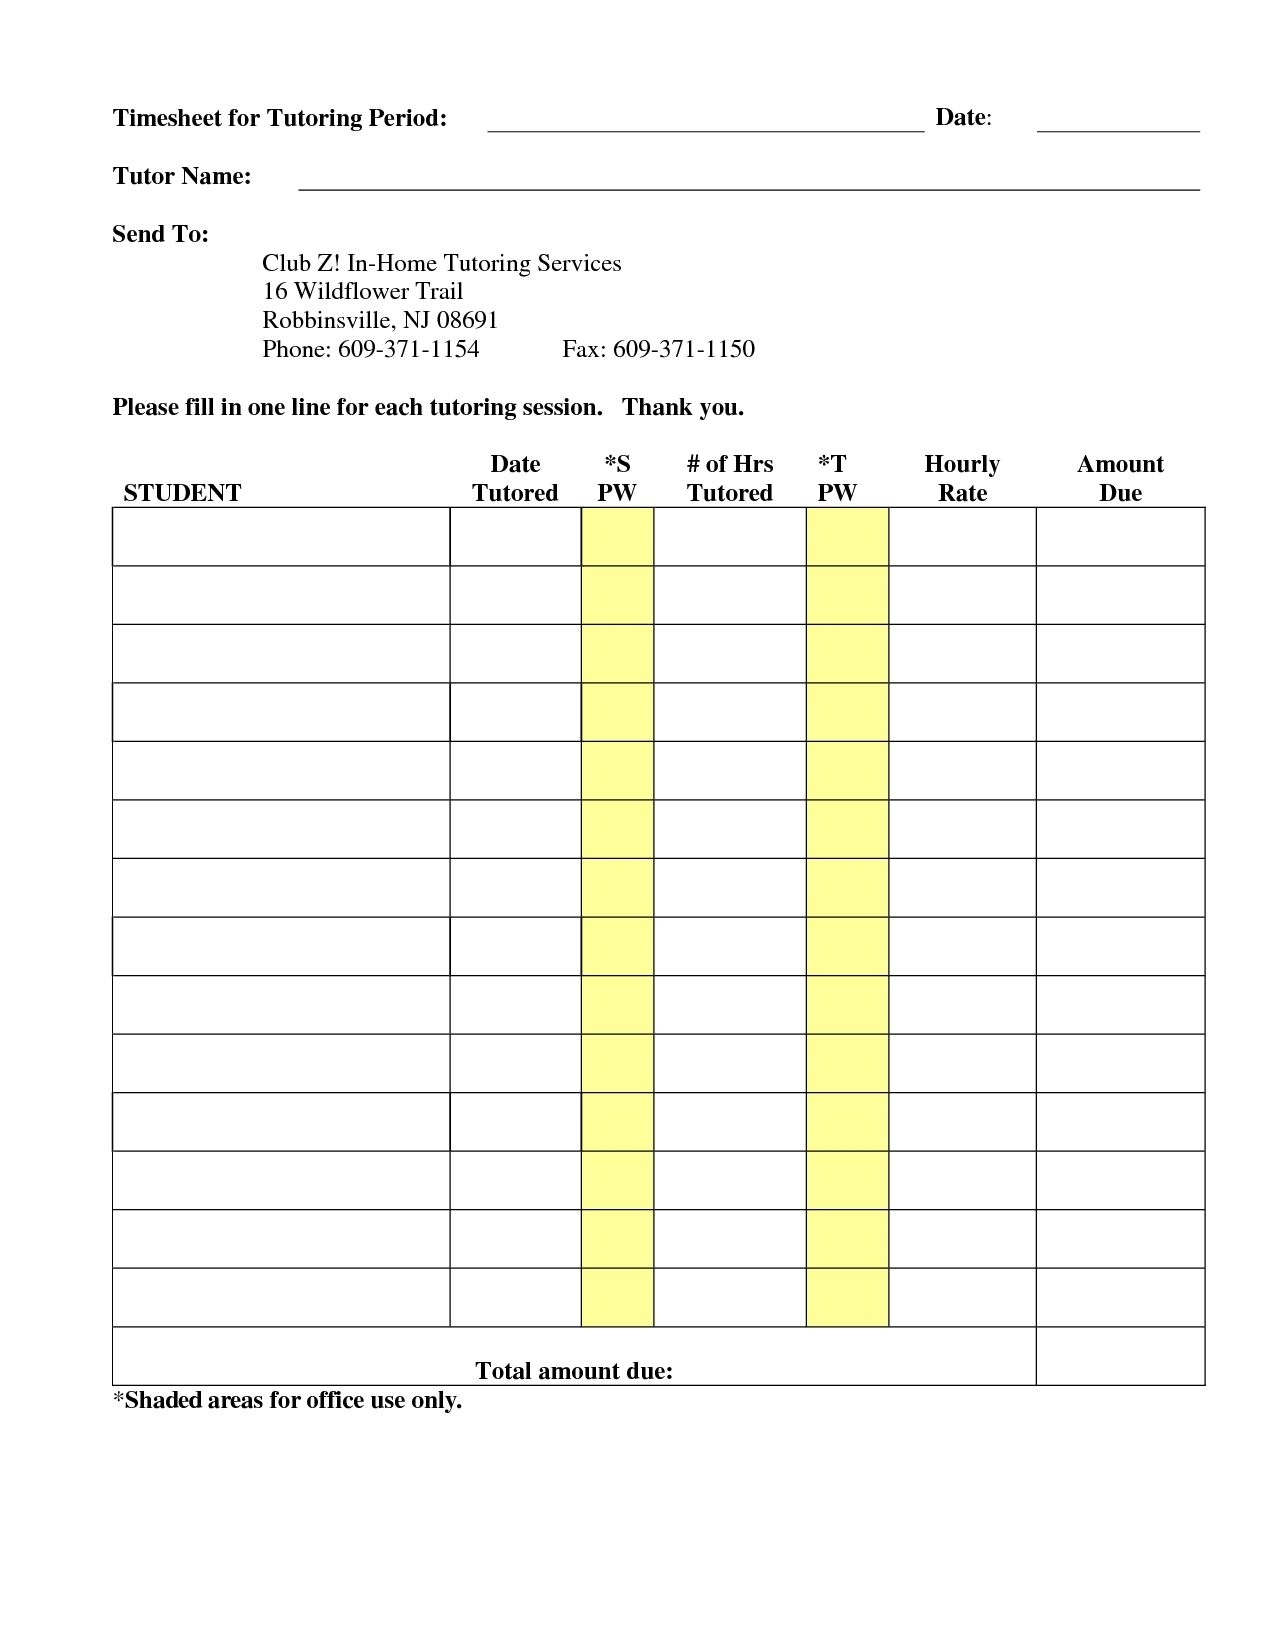 Cool Tutoring Invoice Template Top Invoice Templates Tutoring for Tutoring Template To Fill Out Weekly